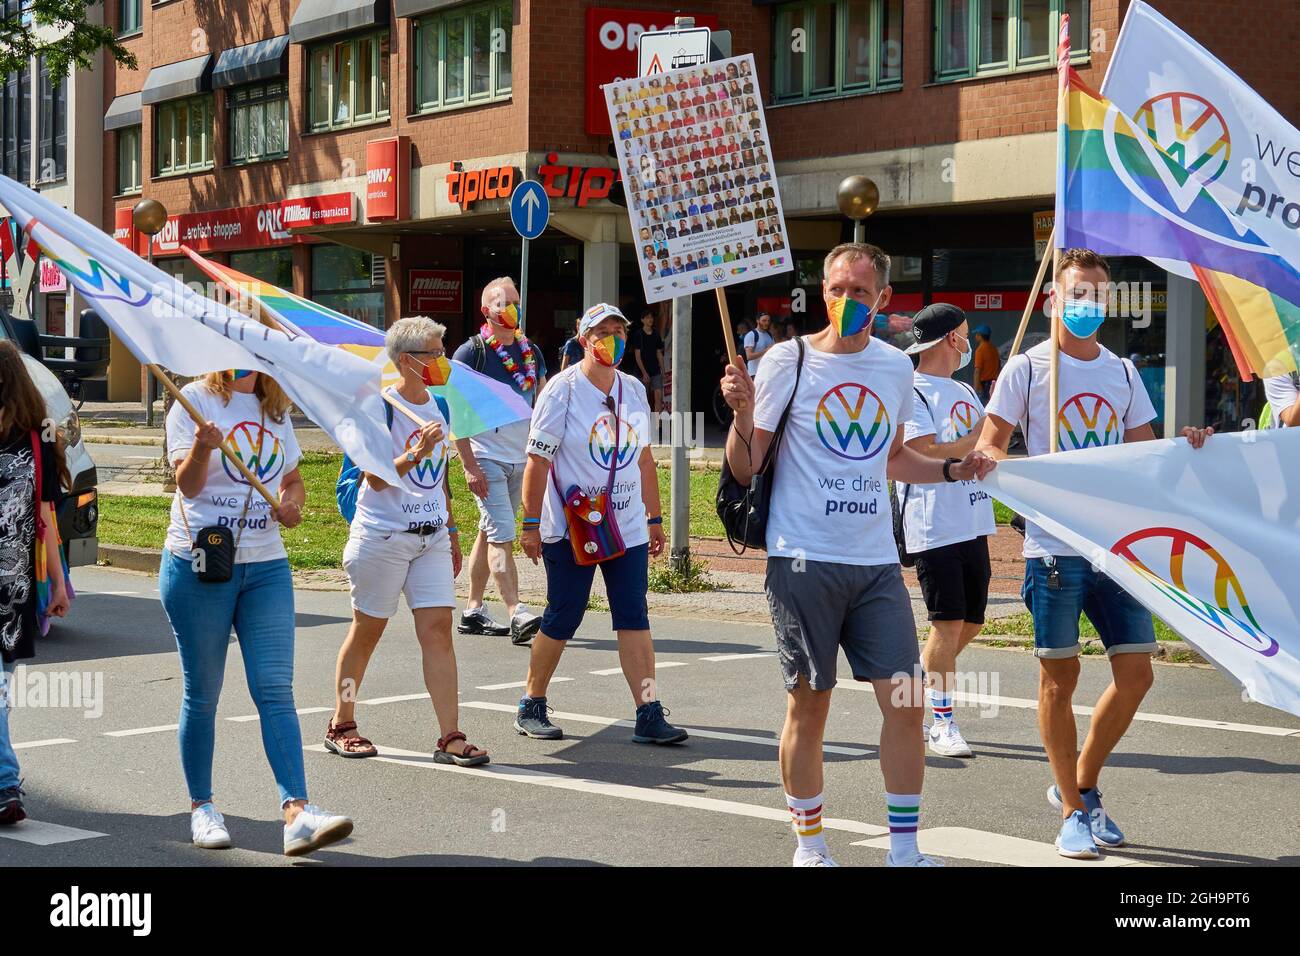 Braunschweig, Germany, August 14, 2021: Employees of the car manufacturer Volkswagen march at the CSD Christopher Street day demonstration. Stock Photo